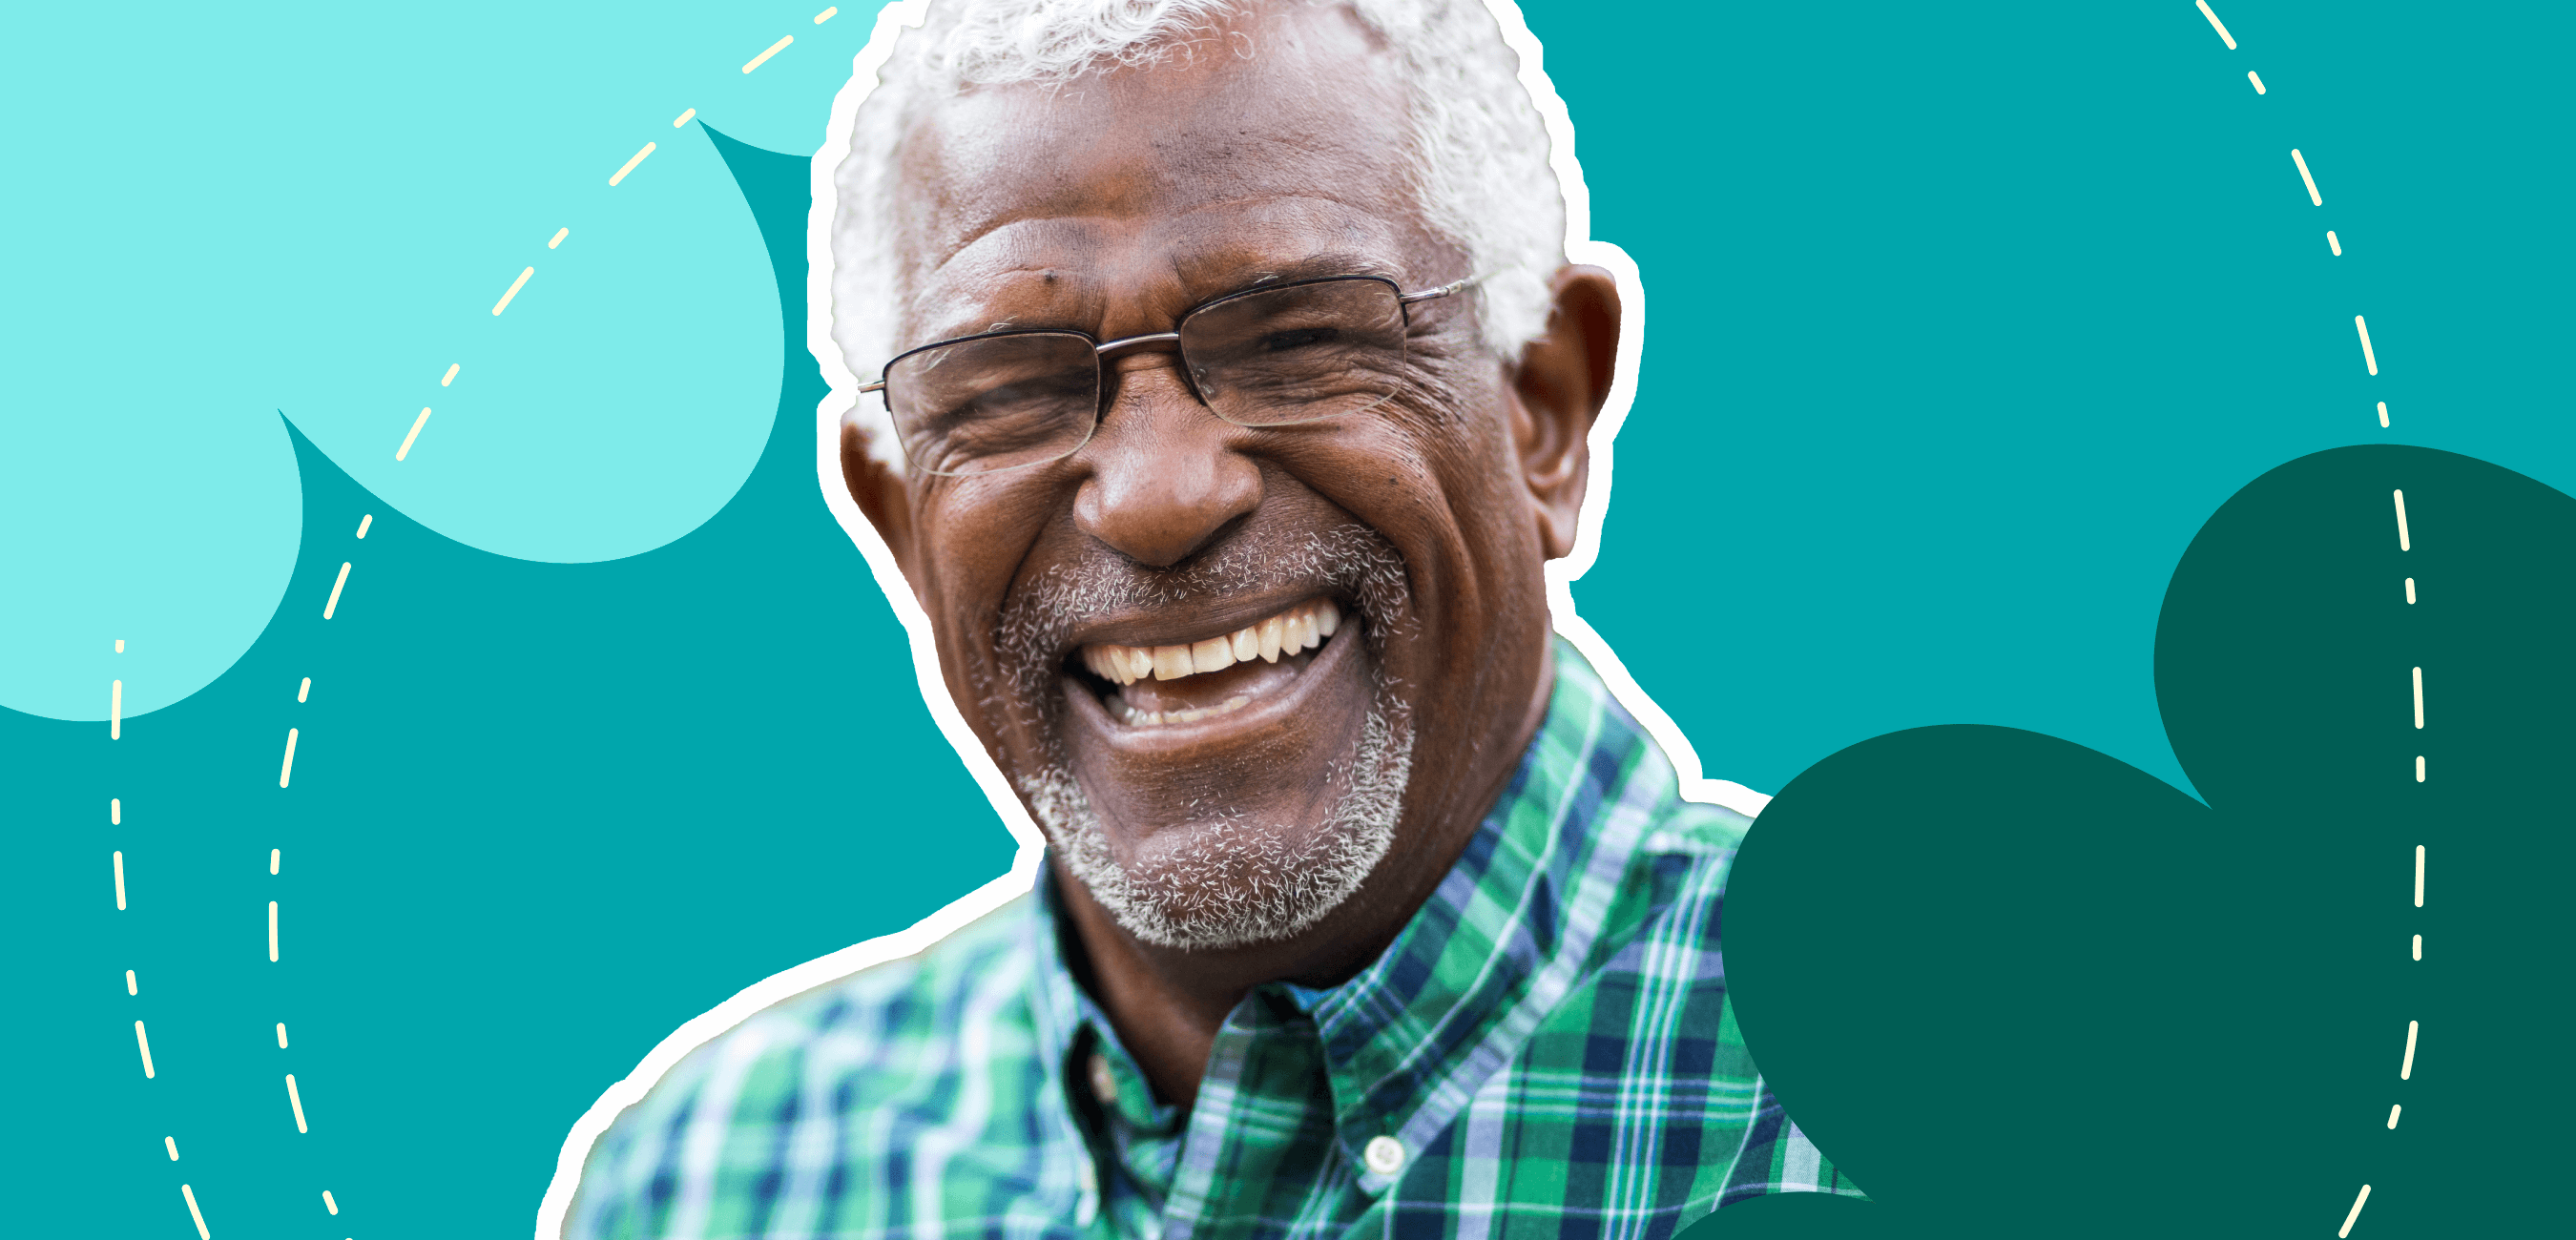 Dental health for older people and why it’s important